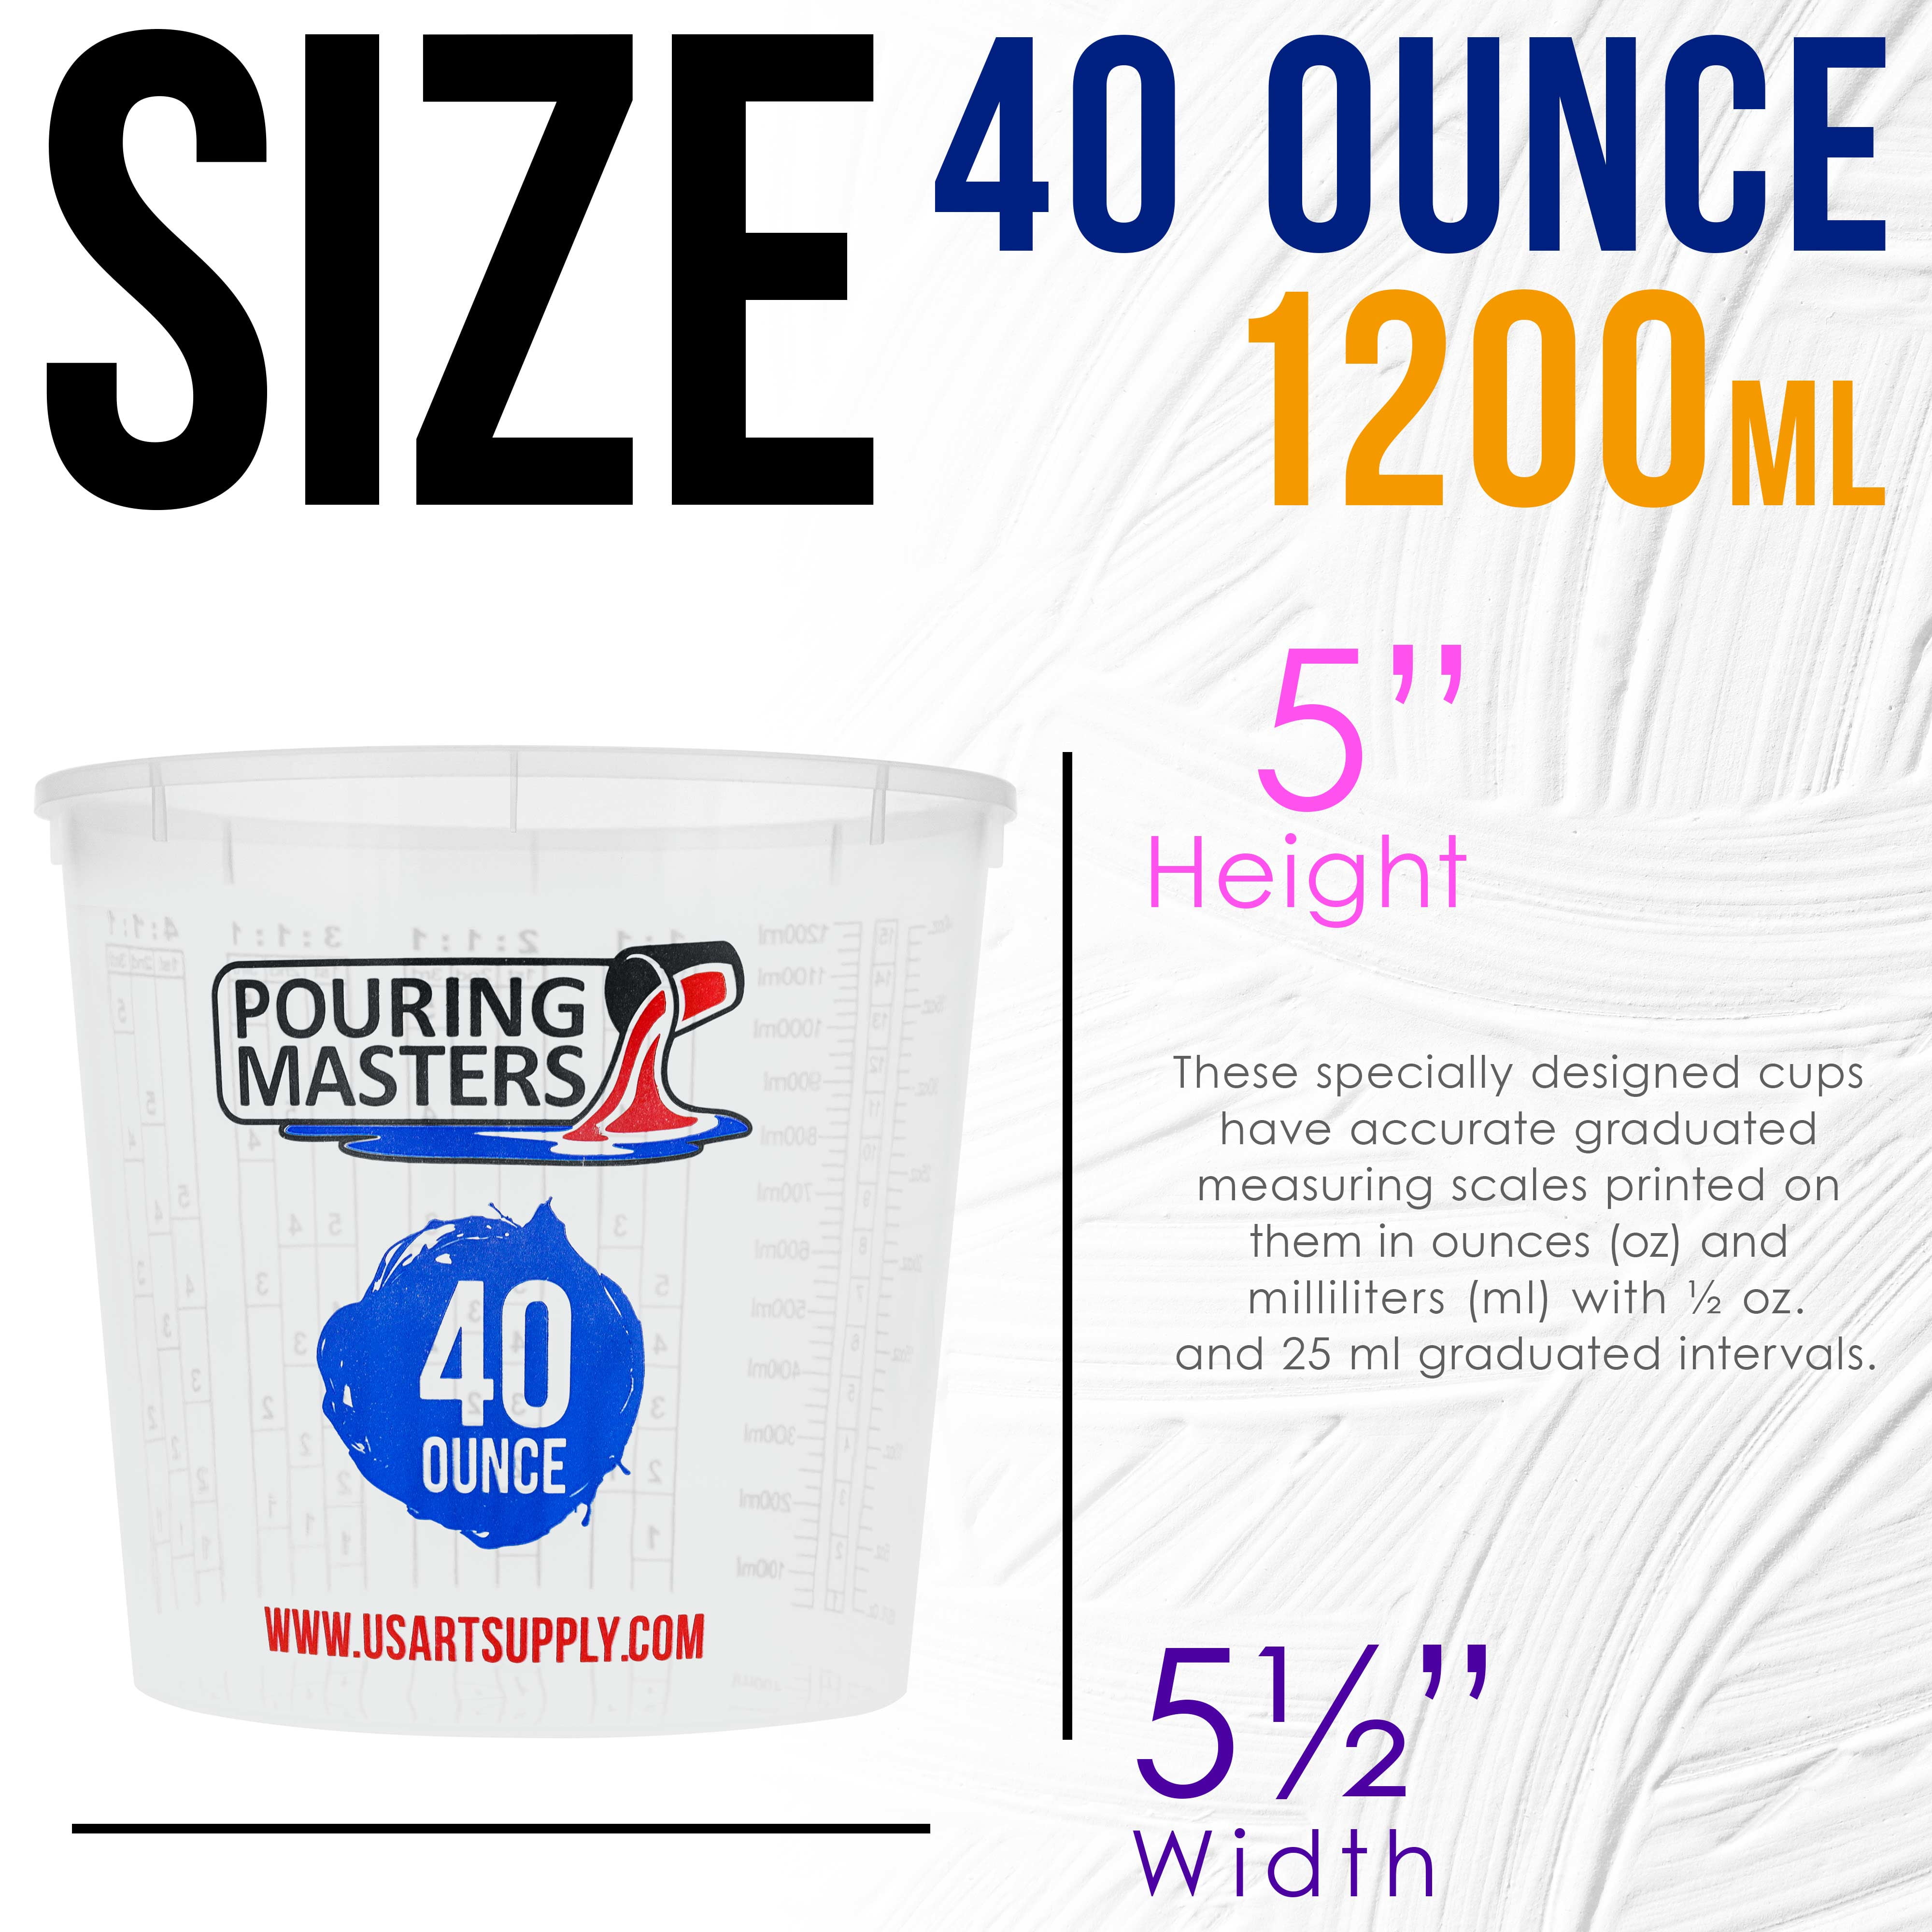 Pouring Masters 40 Ounce (1200ml) Graduated Plastic Mixing Cups (Box of 24)  - For Paint, Resin, Epoxy, Art, Kitchen, Cooking, Baking - Measurements in  OZ., and ML., 4 Different Measuring Ratios 1:1 